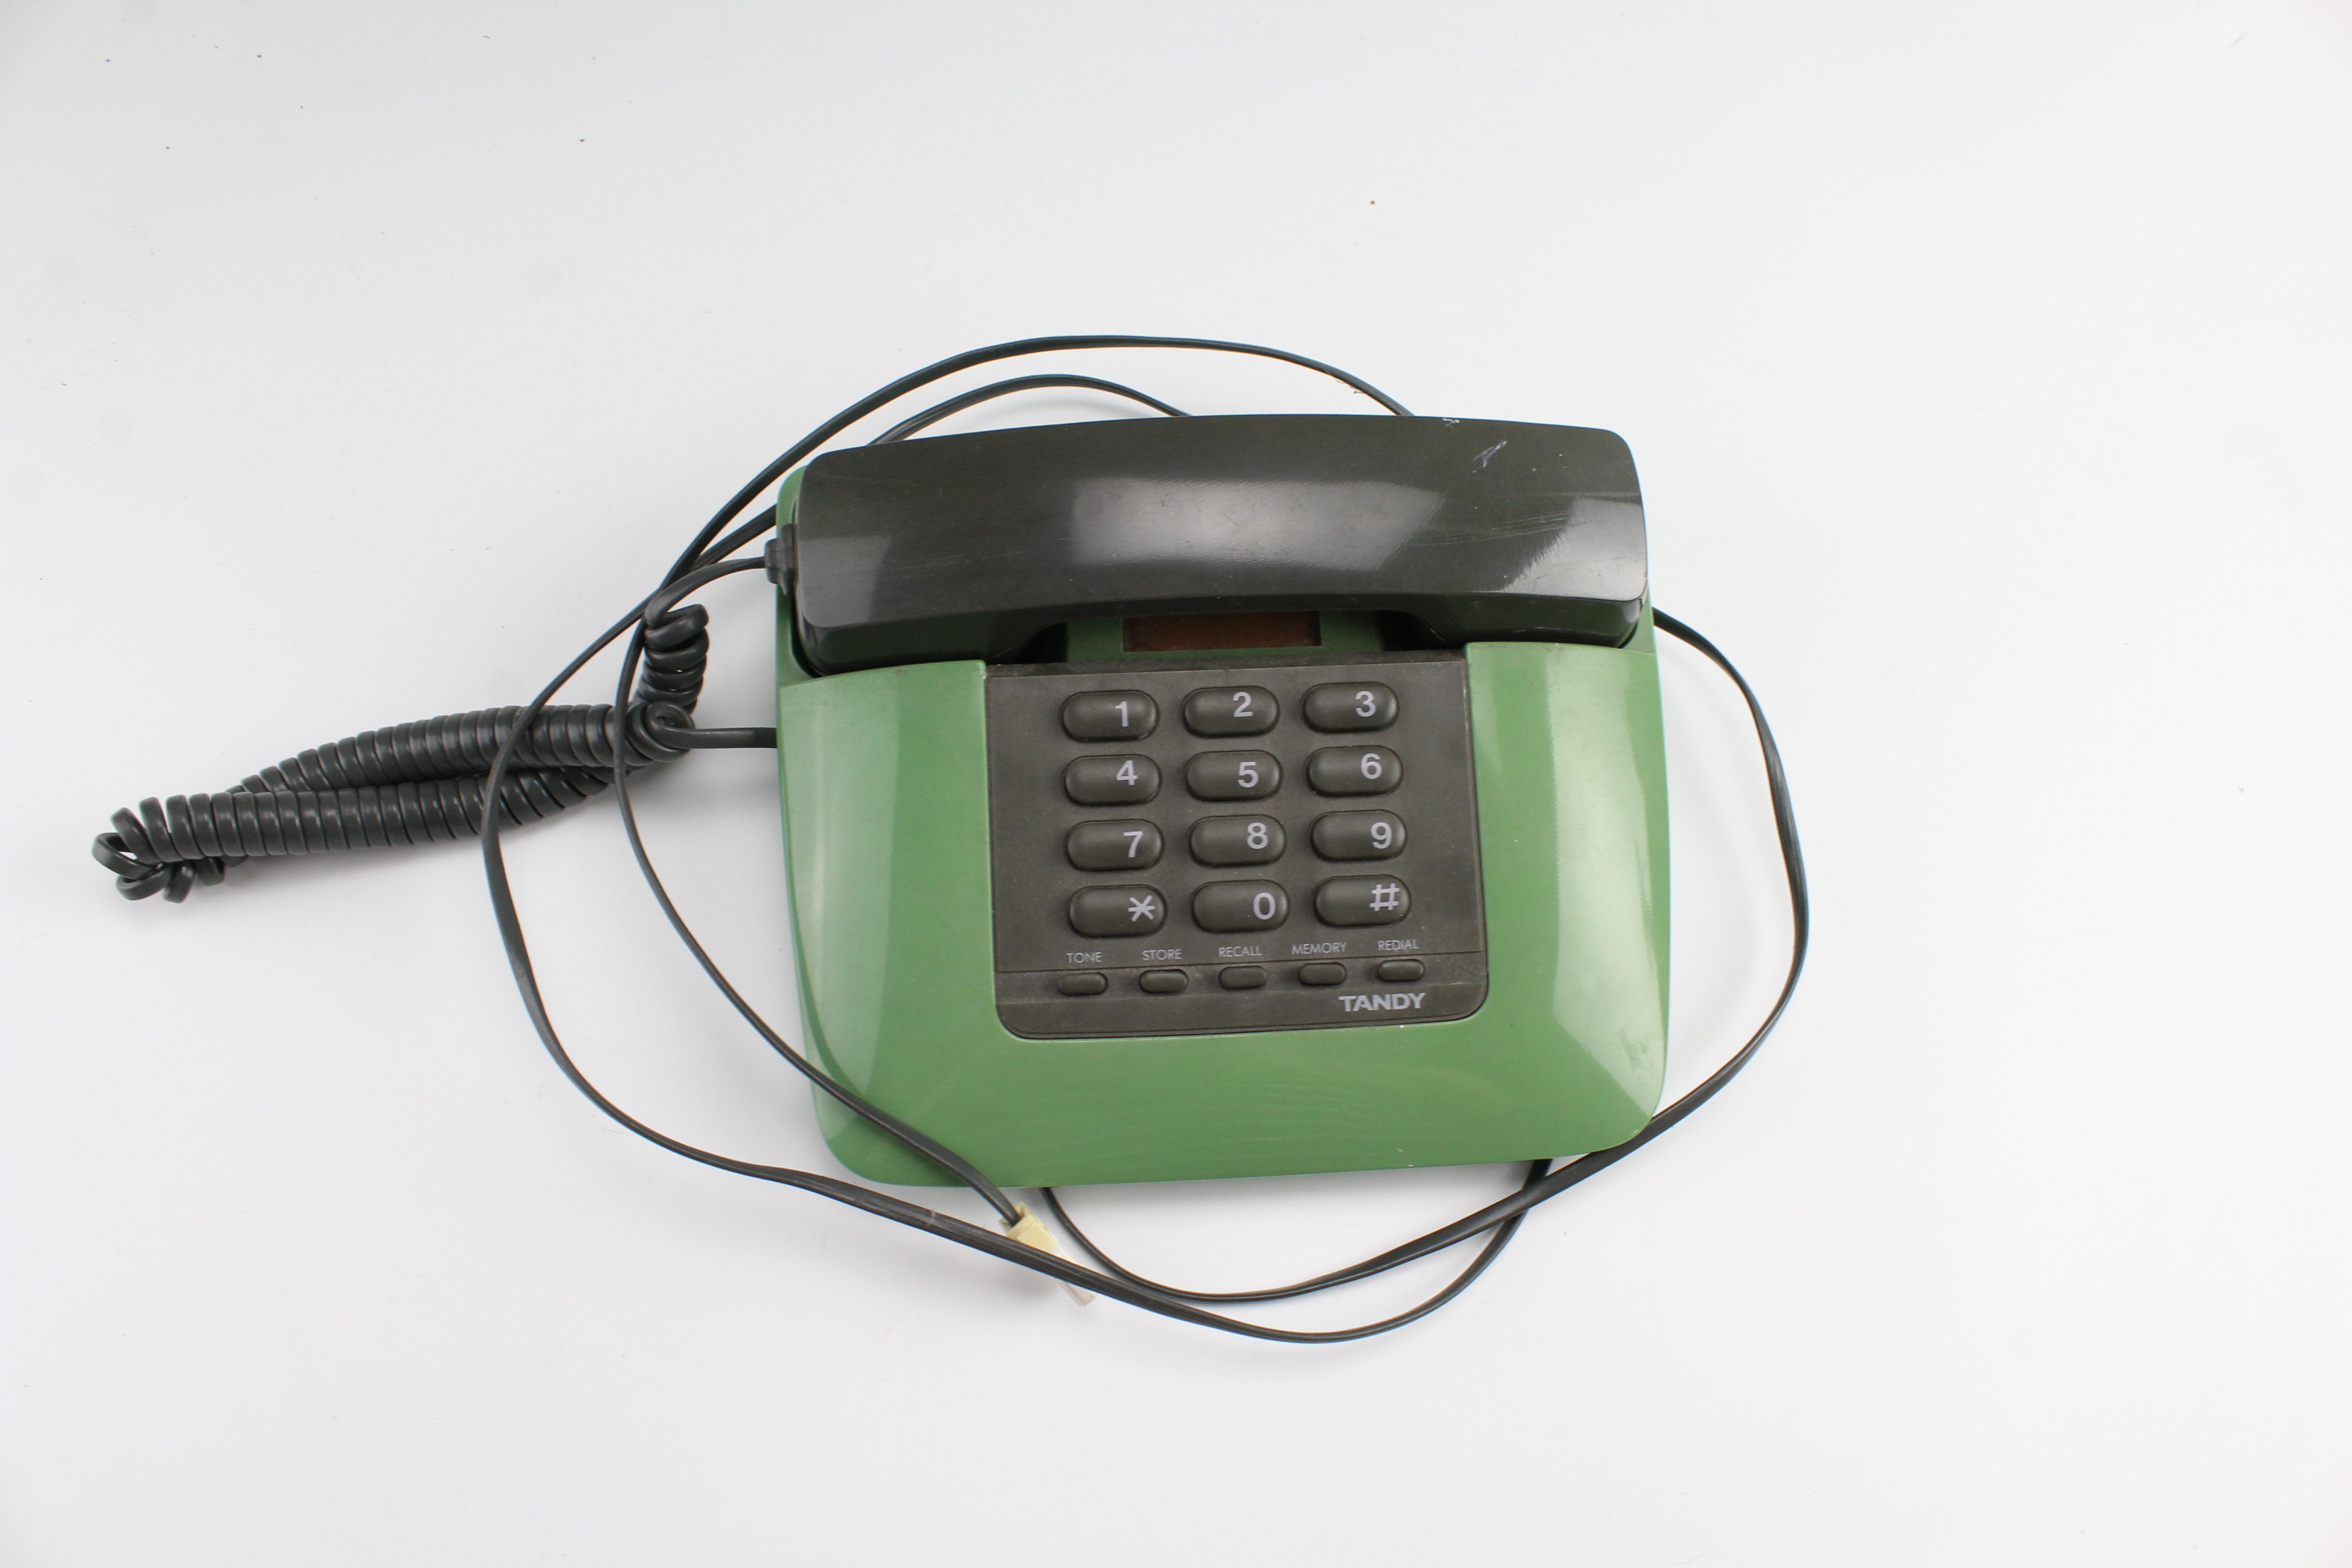 A 1980s Tandy telephone